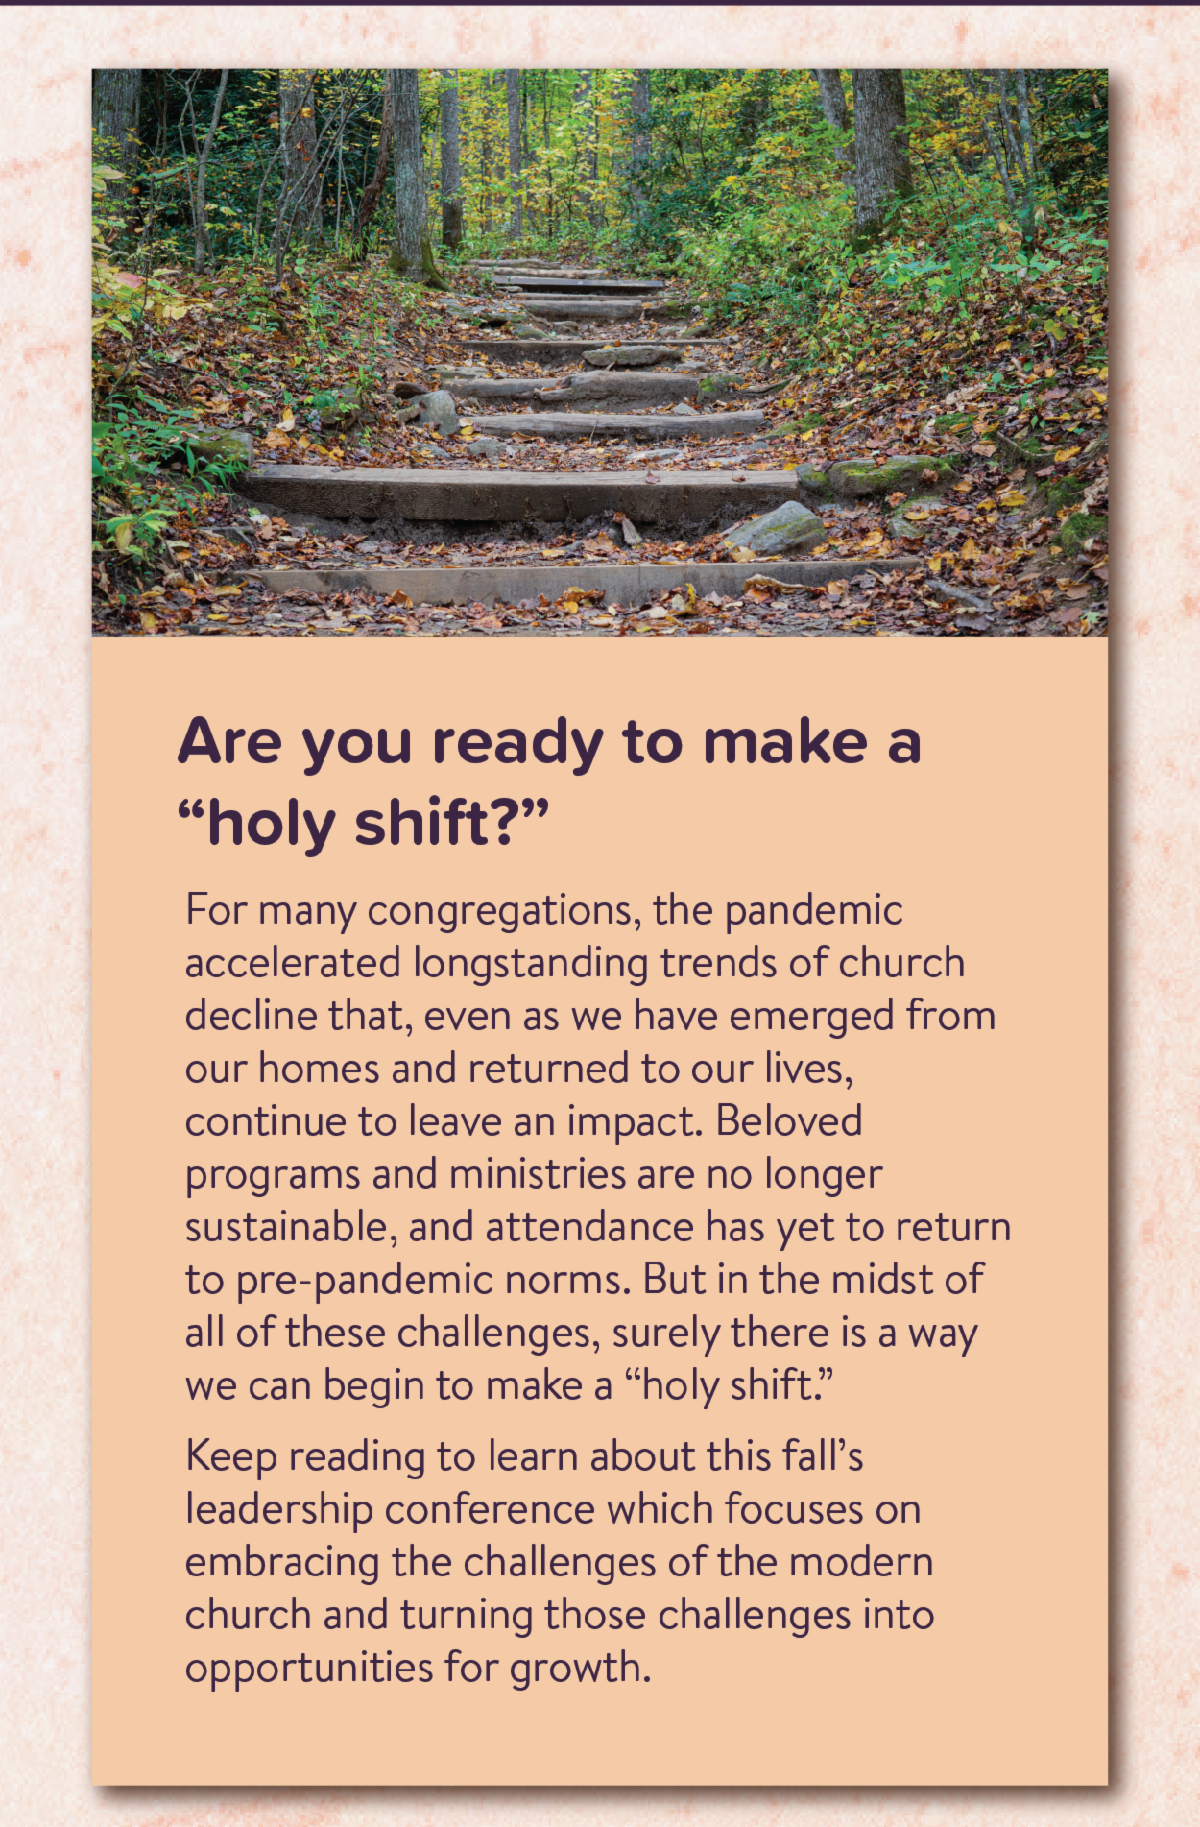 Are you ready to make a "holy shift?" - For many congregations, the pandemic accelerated longstanding trends of church decline that, even as we have emerged from our homes and returned to our lives, continue to leave an impact. Beloved programs and ministries are no longer sustainable, and attendance has yet to return to pre-pandemic norms. But in the midst of all of these challenges, surely there is a way we can begin to make a “holy shift.” Keep reading to learn about this fall’s leadership conference which focuses on embracing the challenges of the modern church and turning those challenges into opportunities for growth.